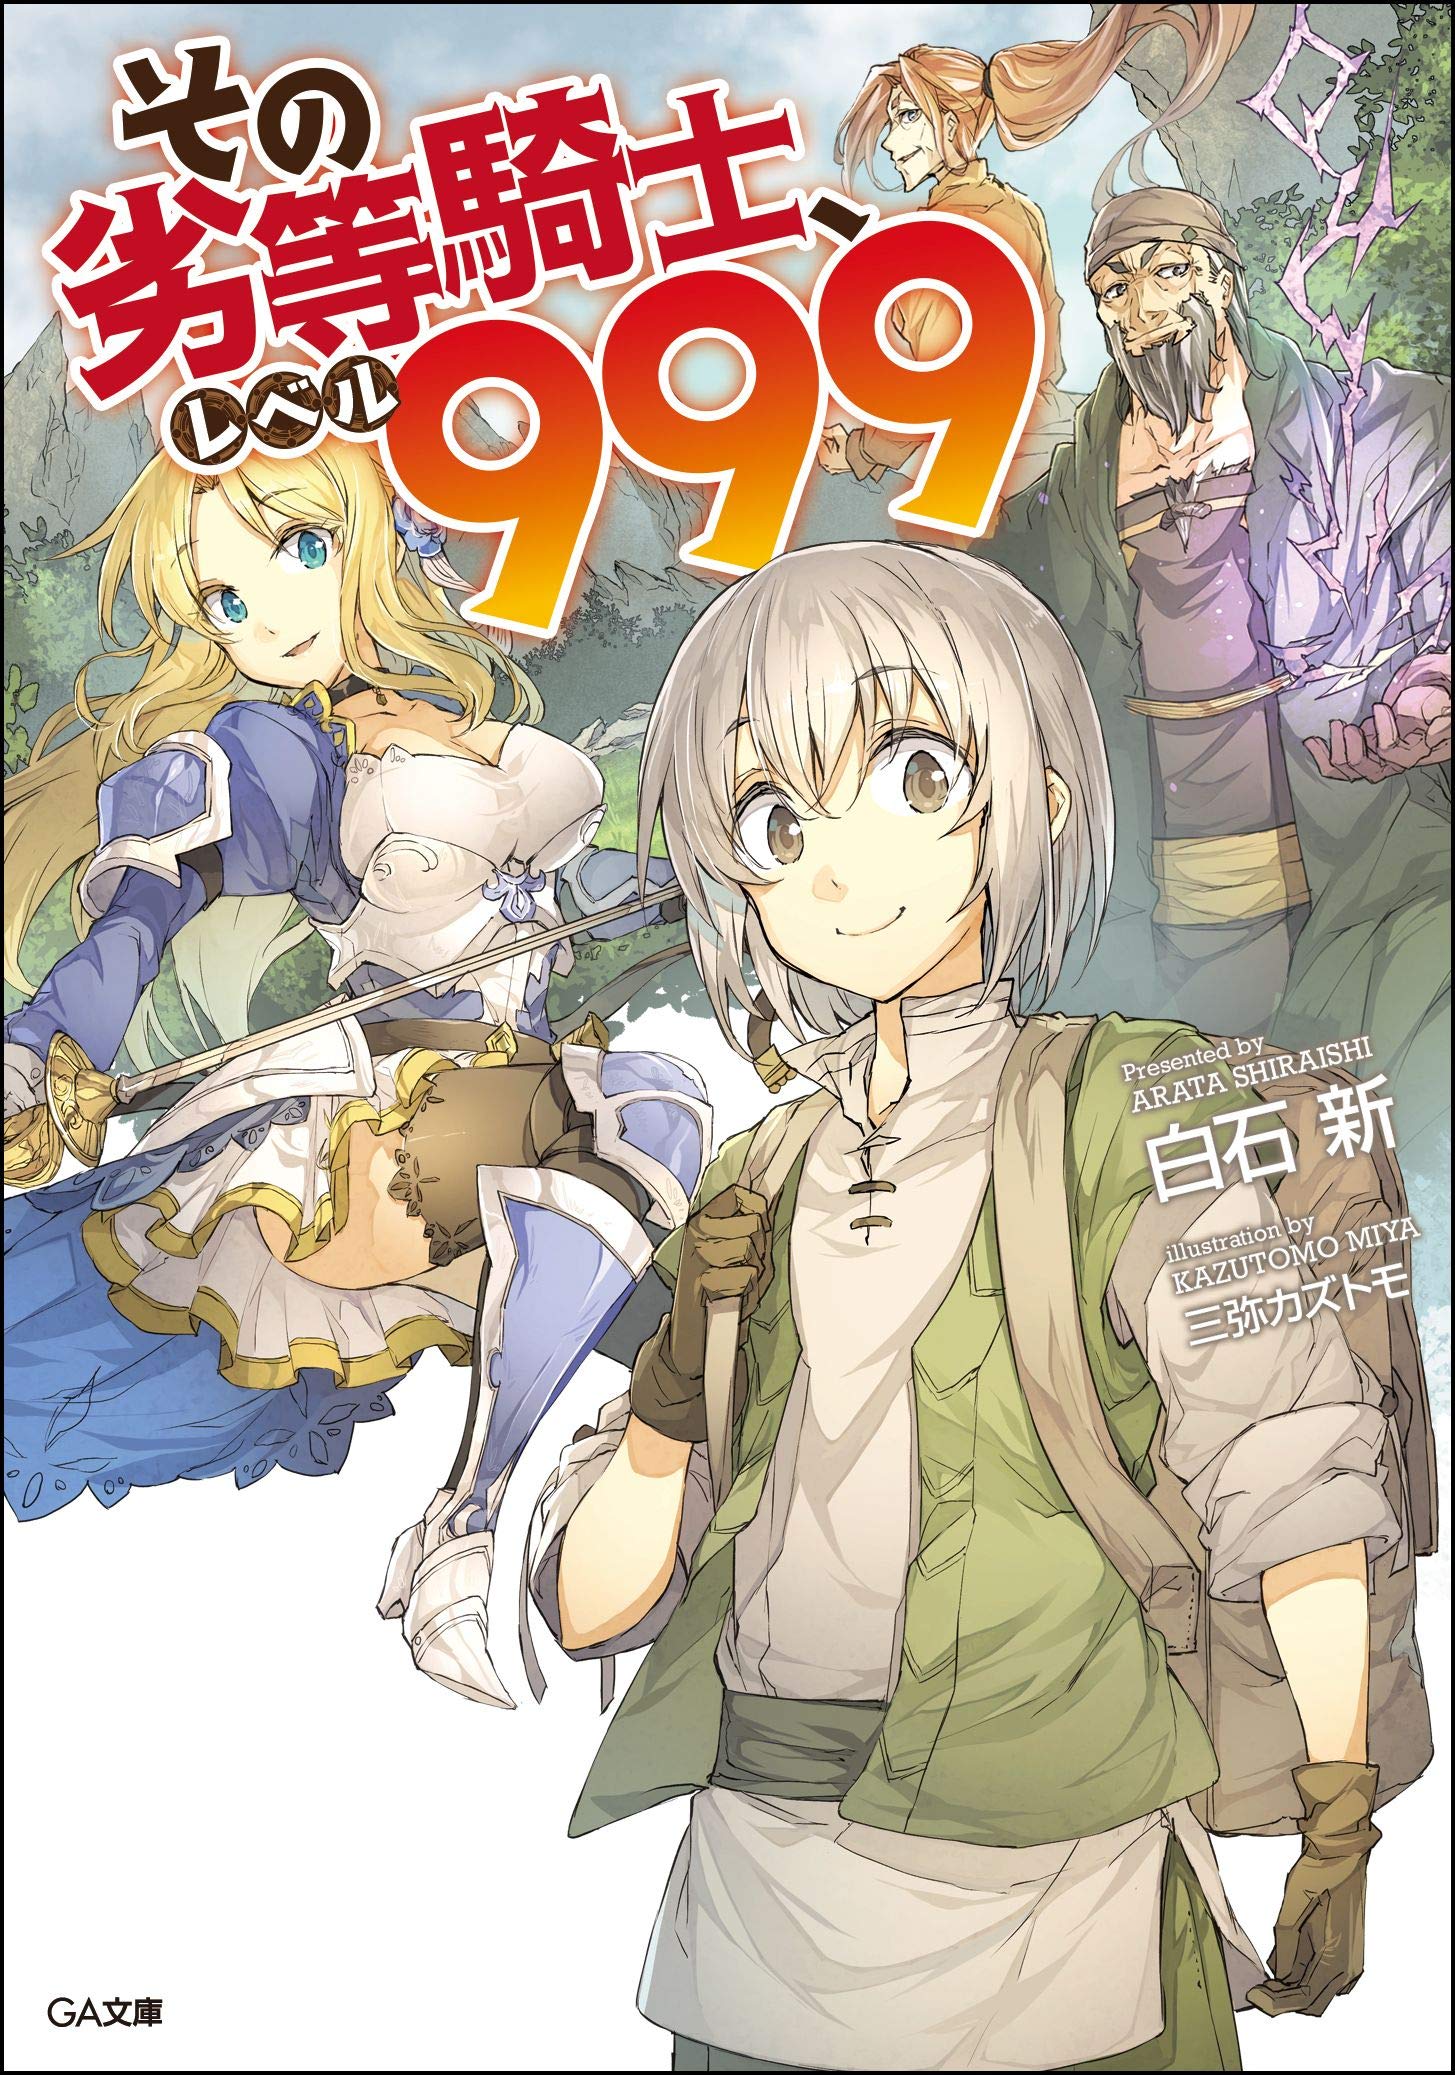 Read That Inferior Knight Lv 999 Manga Online In English